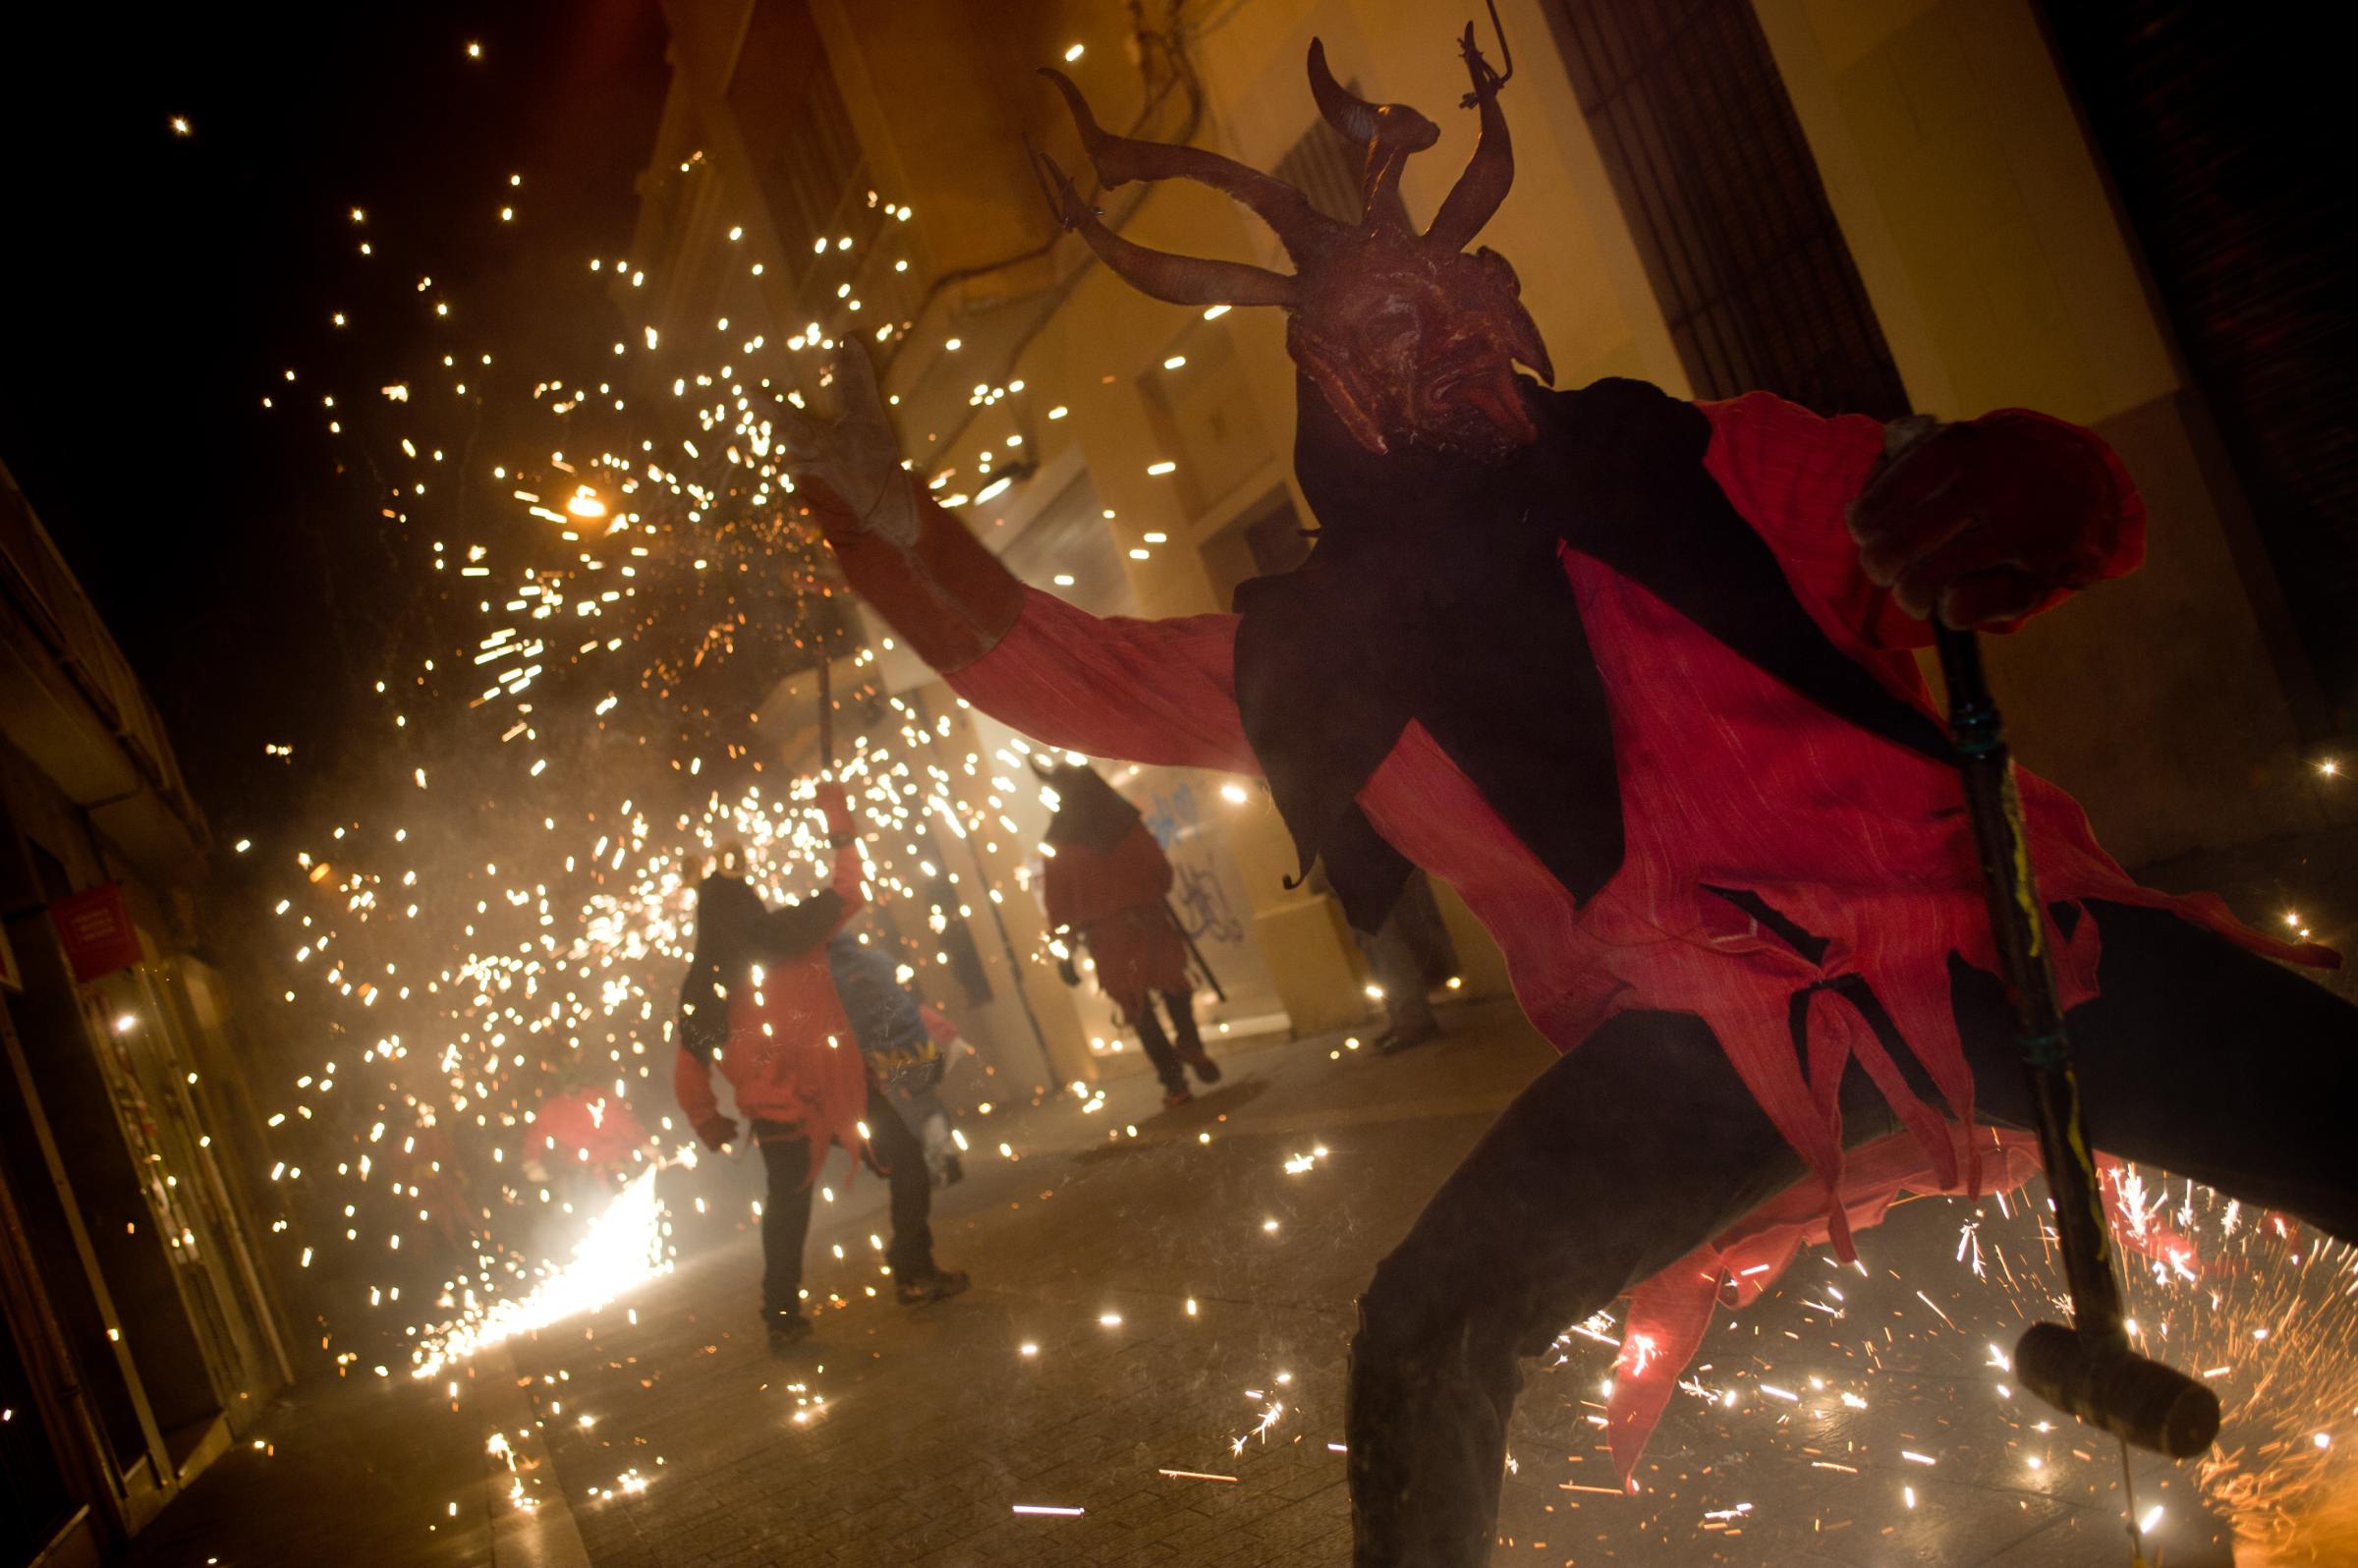 Foguerons Festival held in the Gr‡cia district of Barcelona